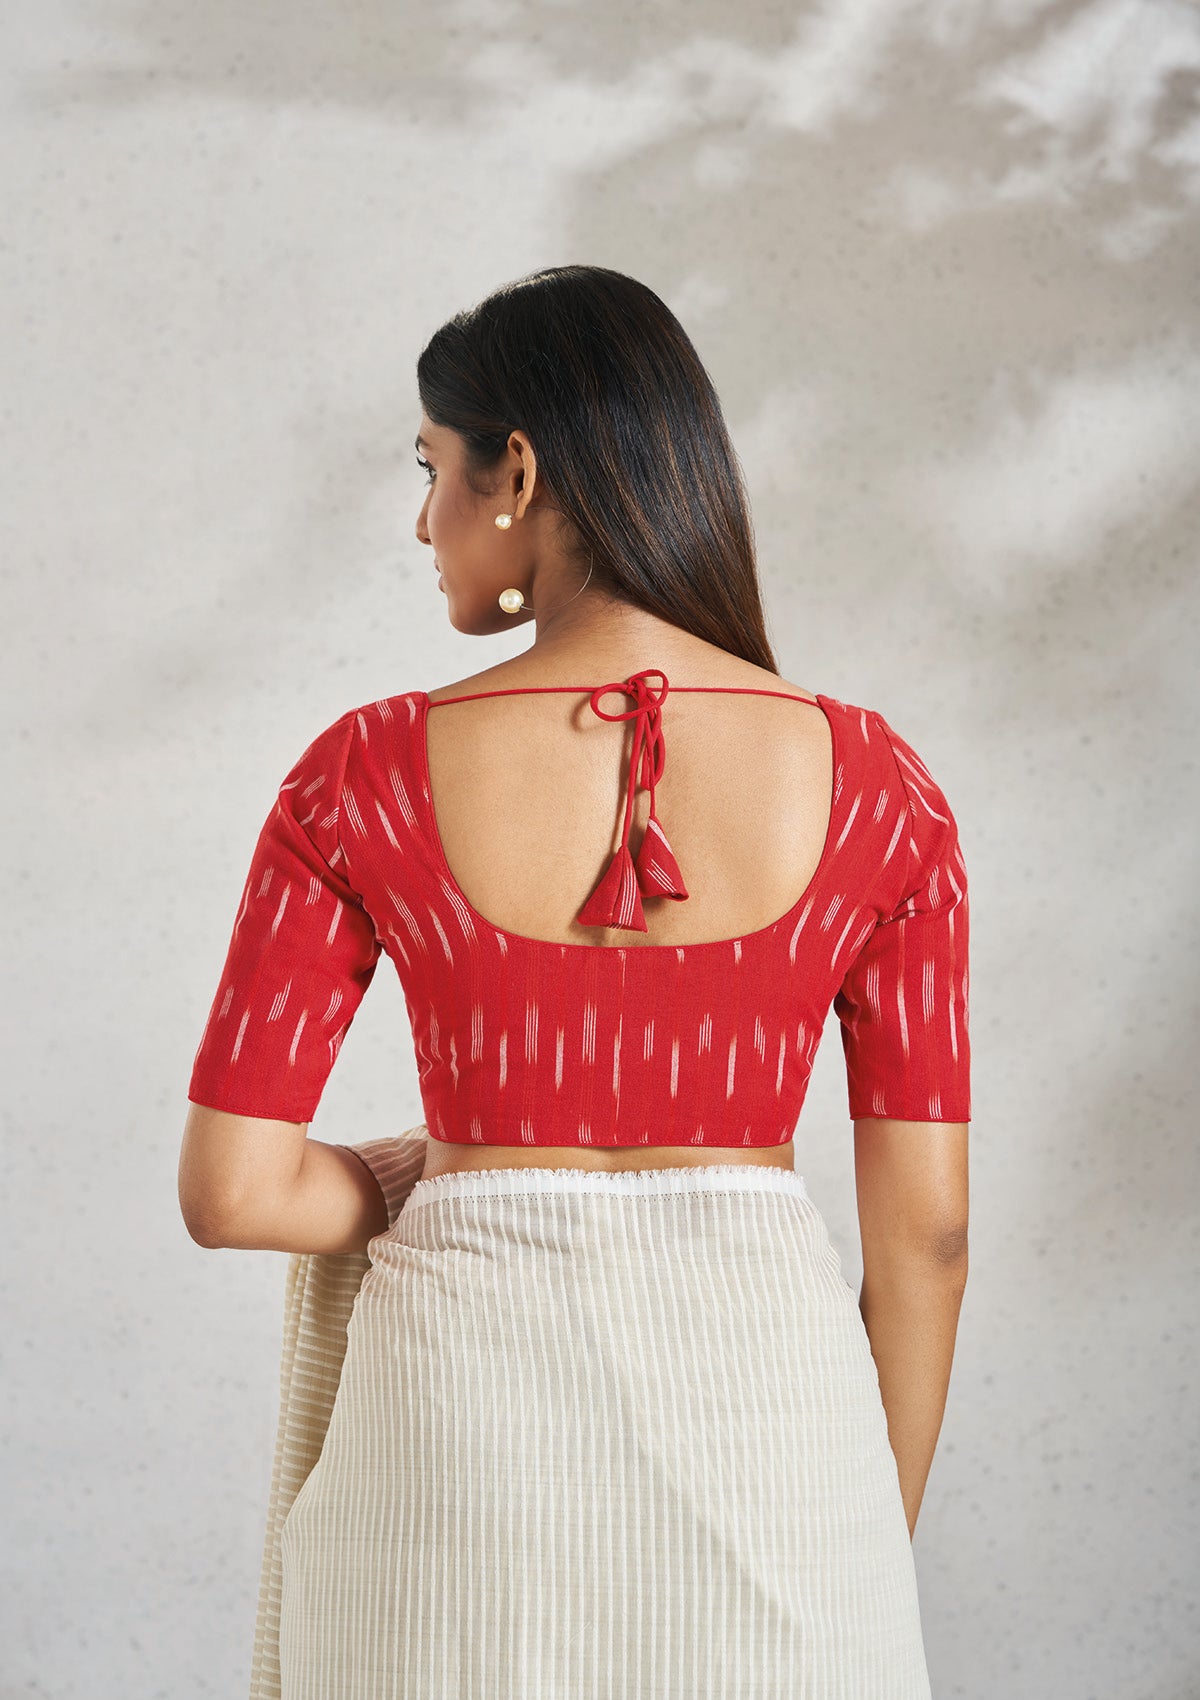 Red Cotton Blouse